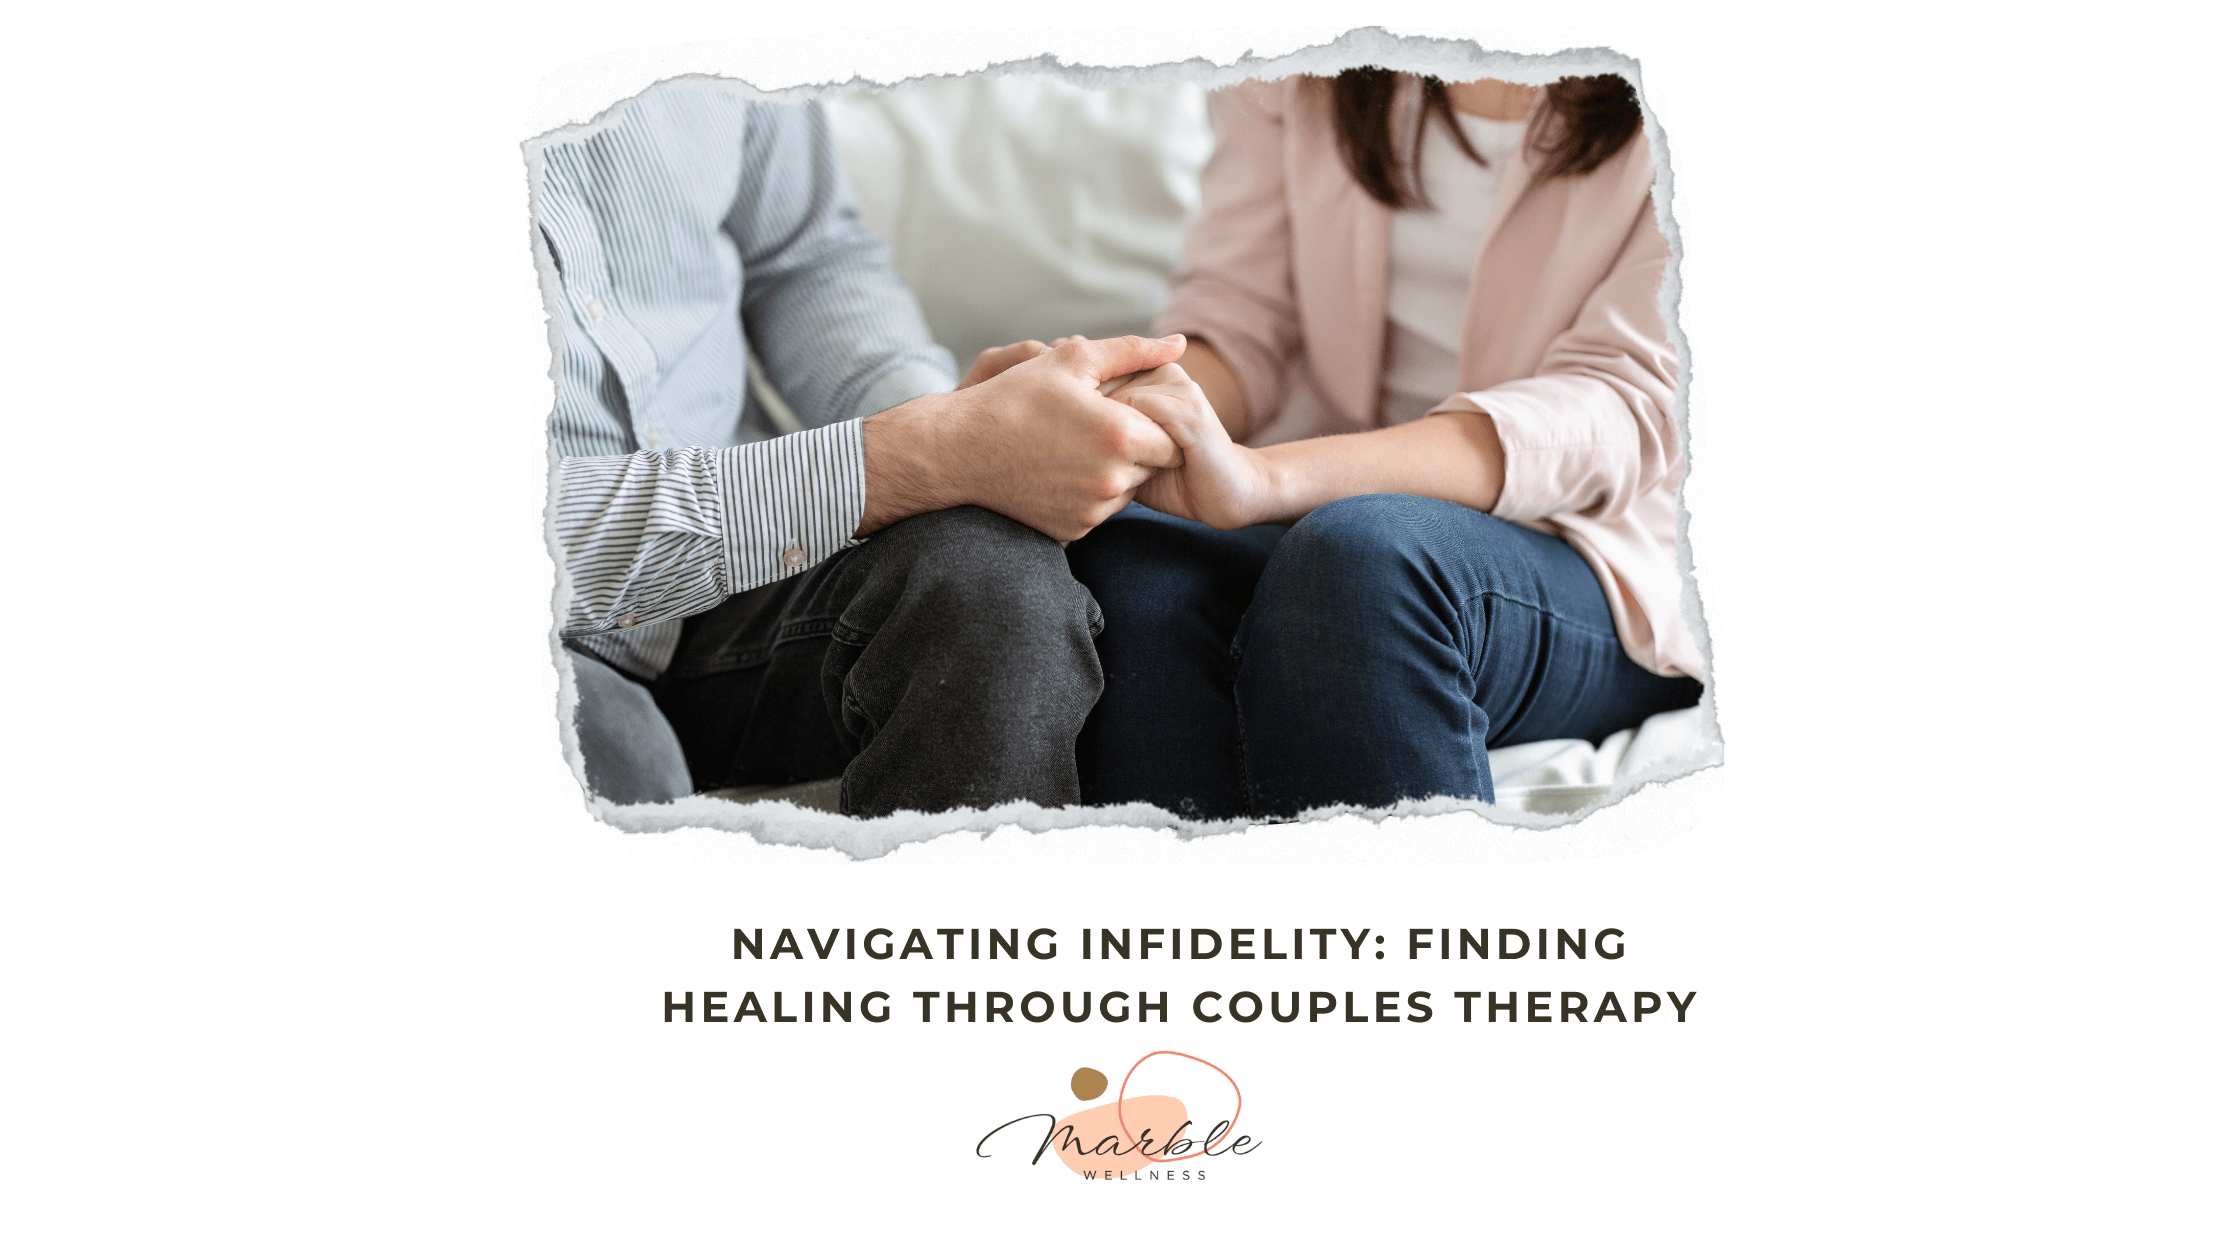 Navigating Infidelity: Finding Healing Through Couples Therapy